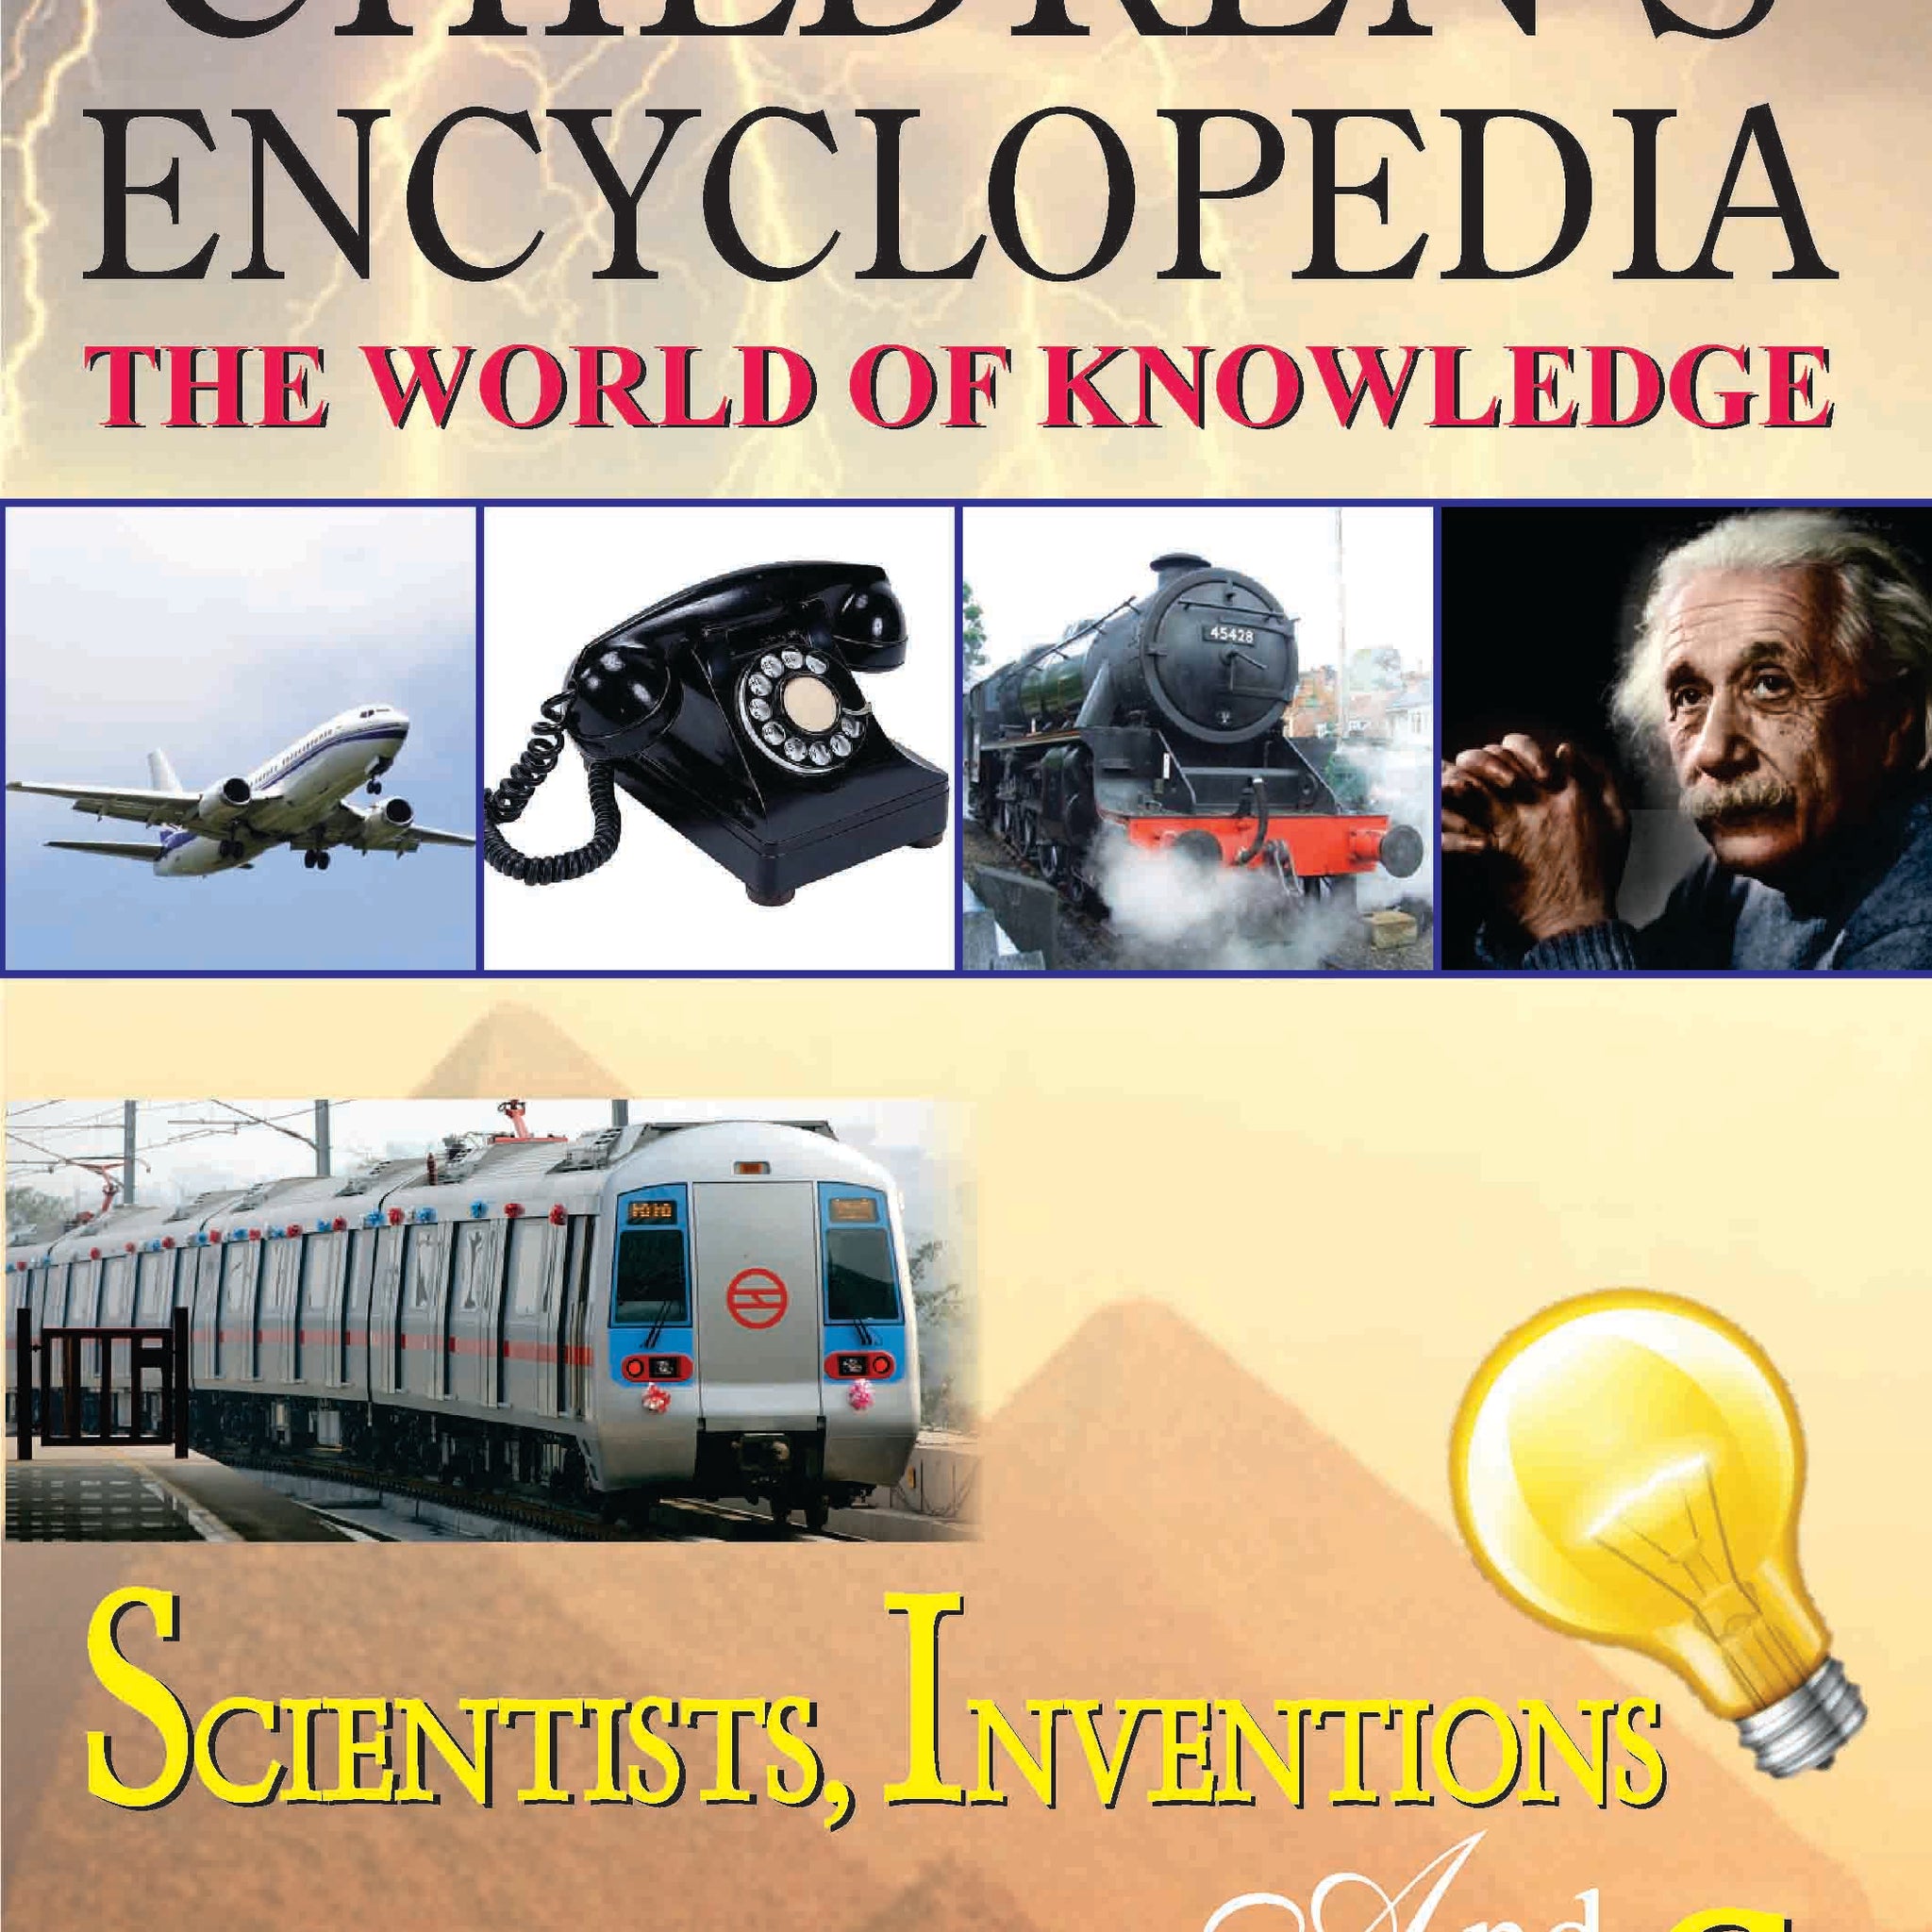 Children's Encyclopedia - Scientists, Inventions And Discoveries